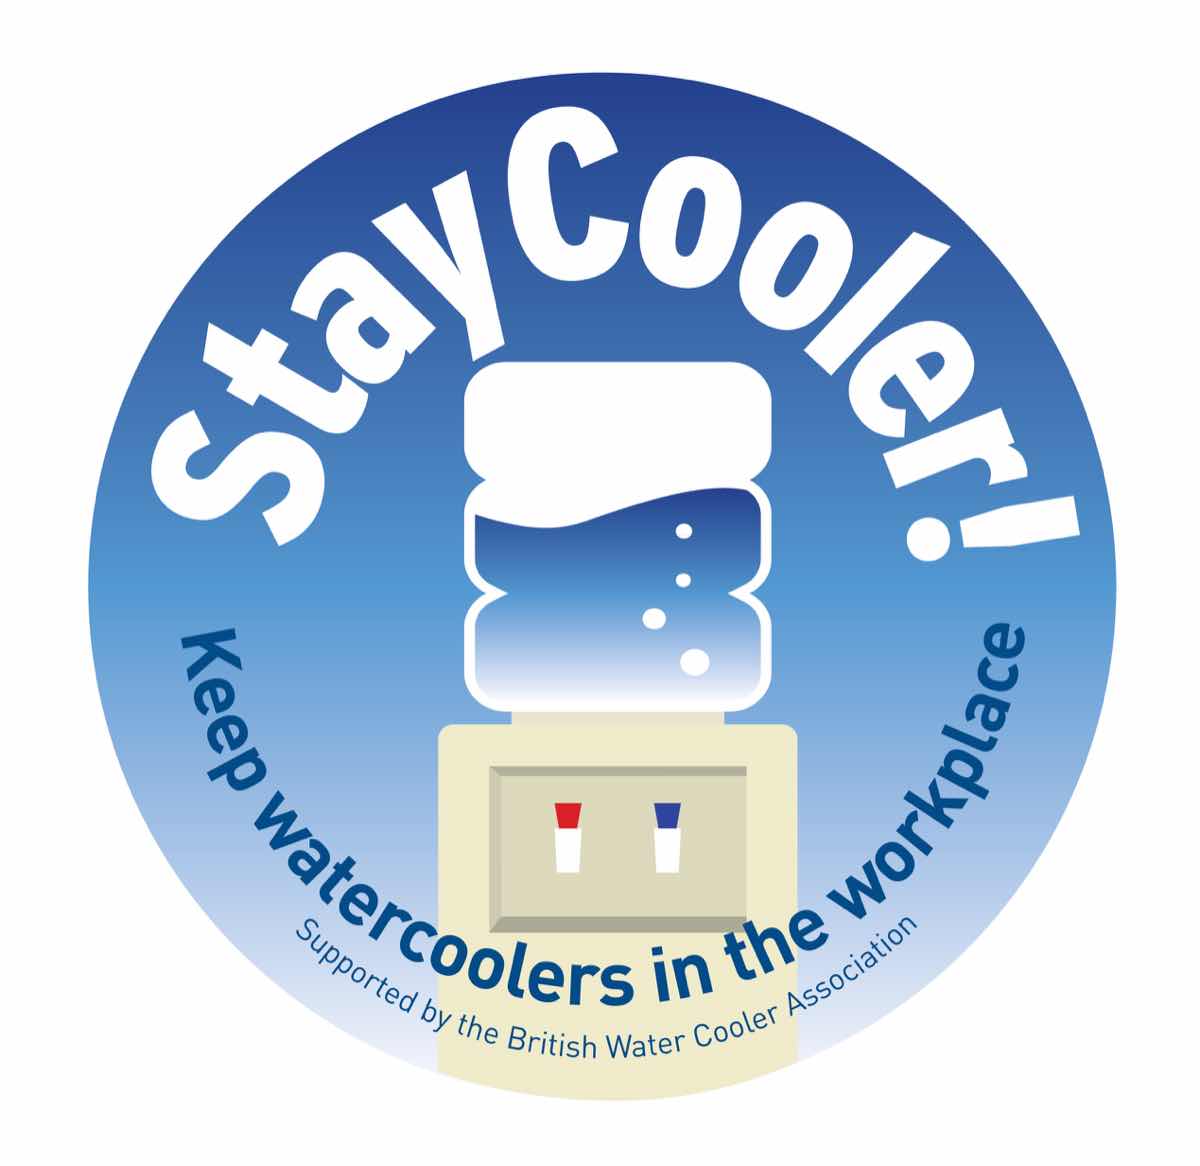 BWCA launches 'Stay Cooler' campaign